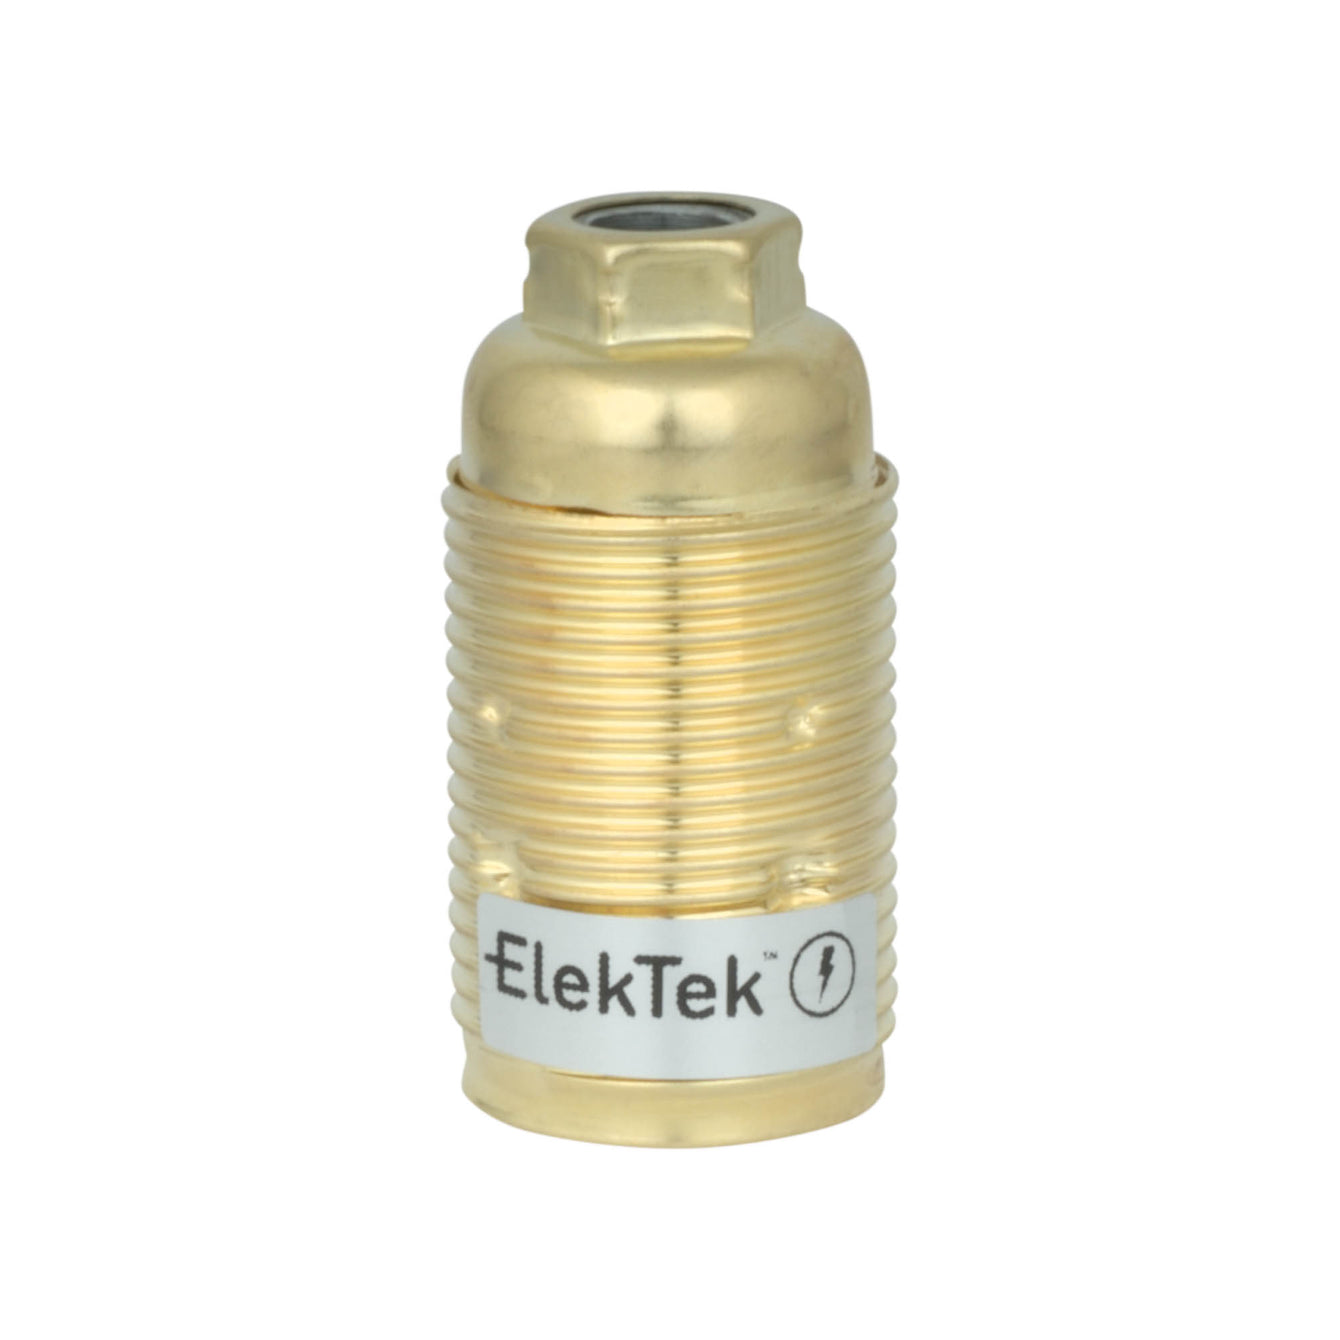 ElekTek SES E14 Lamp Holder 10mm Entry Small Edison Screw Earthed With Shade Rings Cord Grip Brass - Buy It Better Nickel